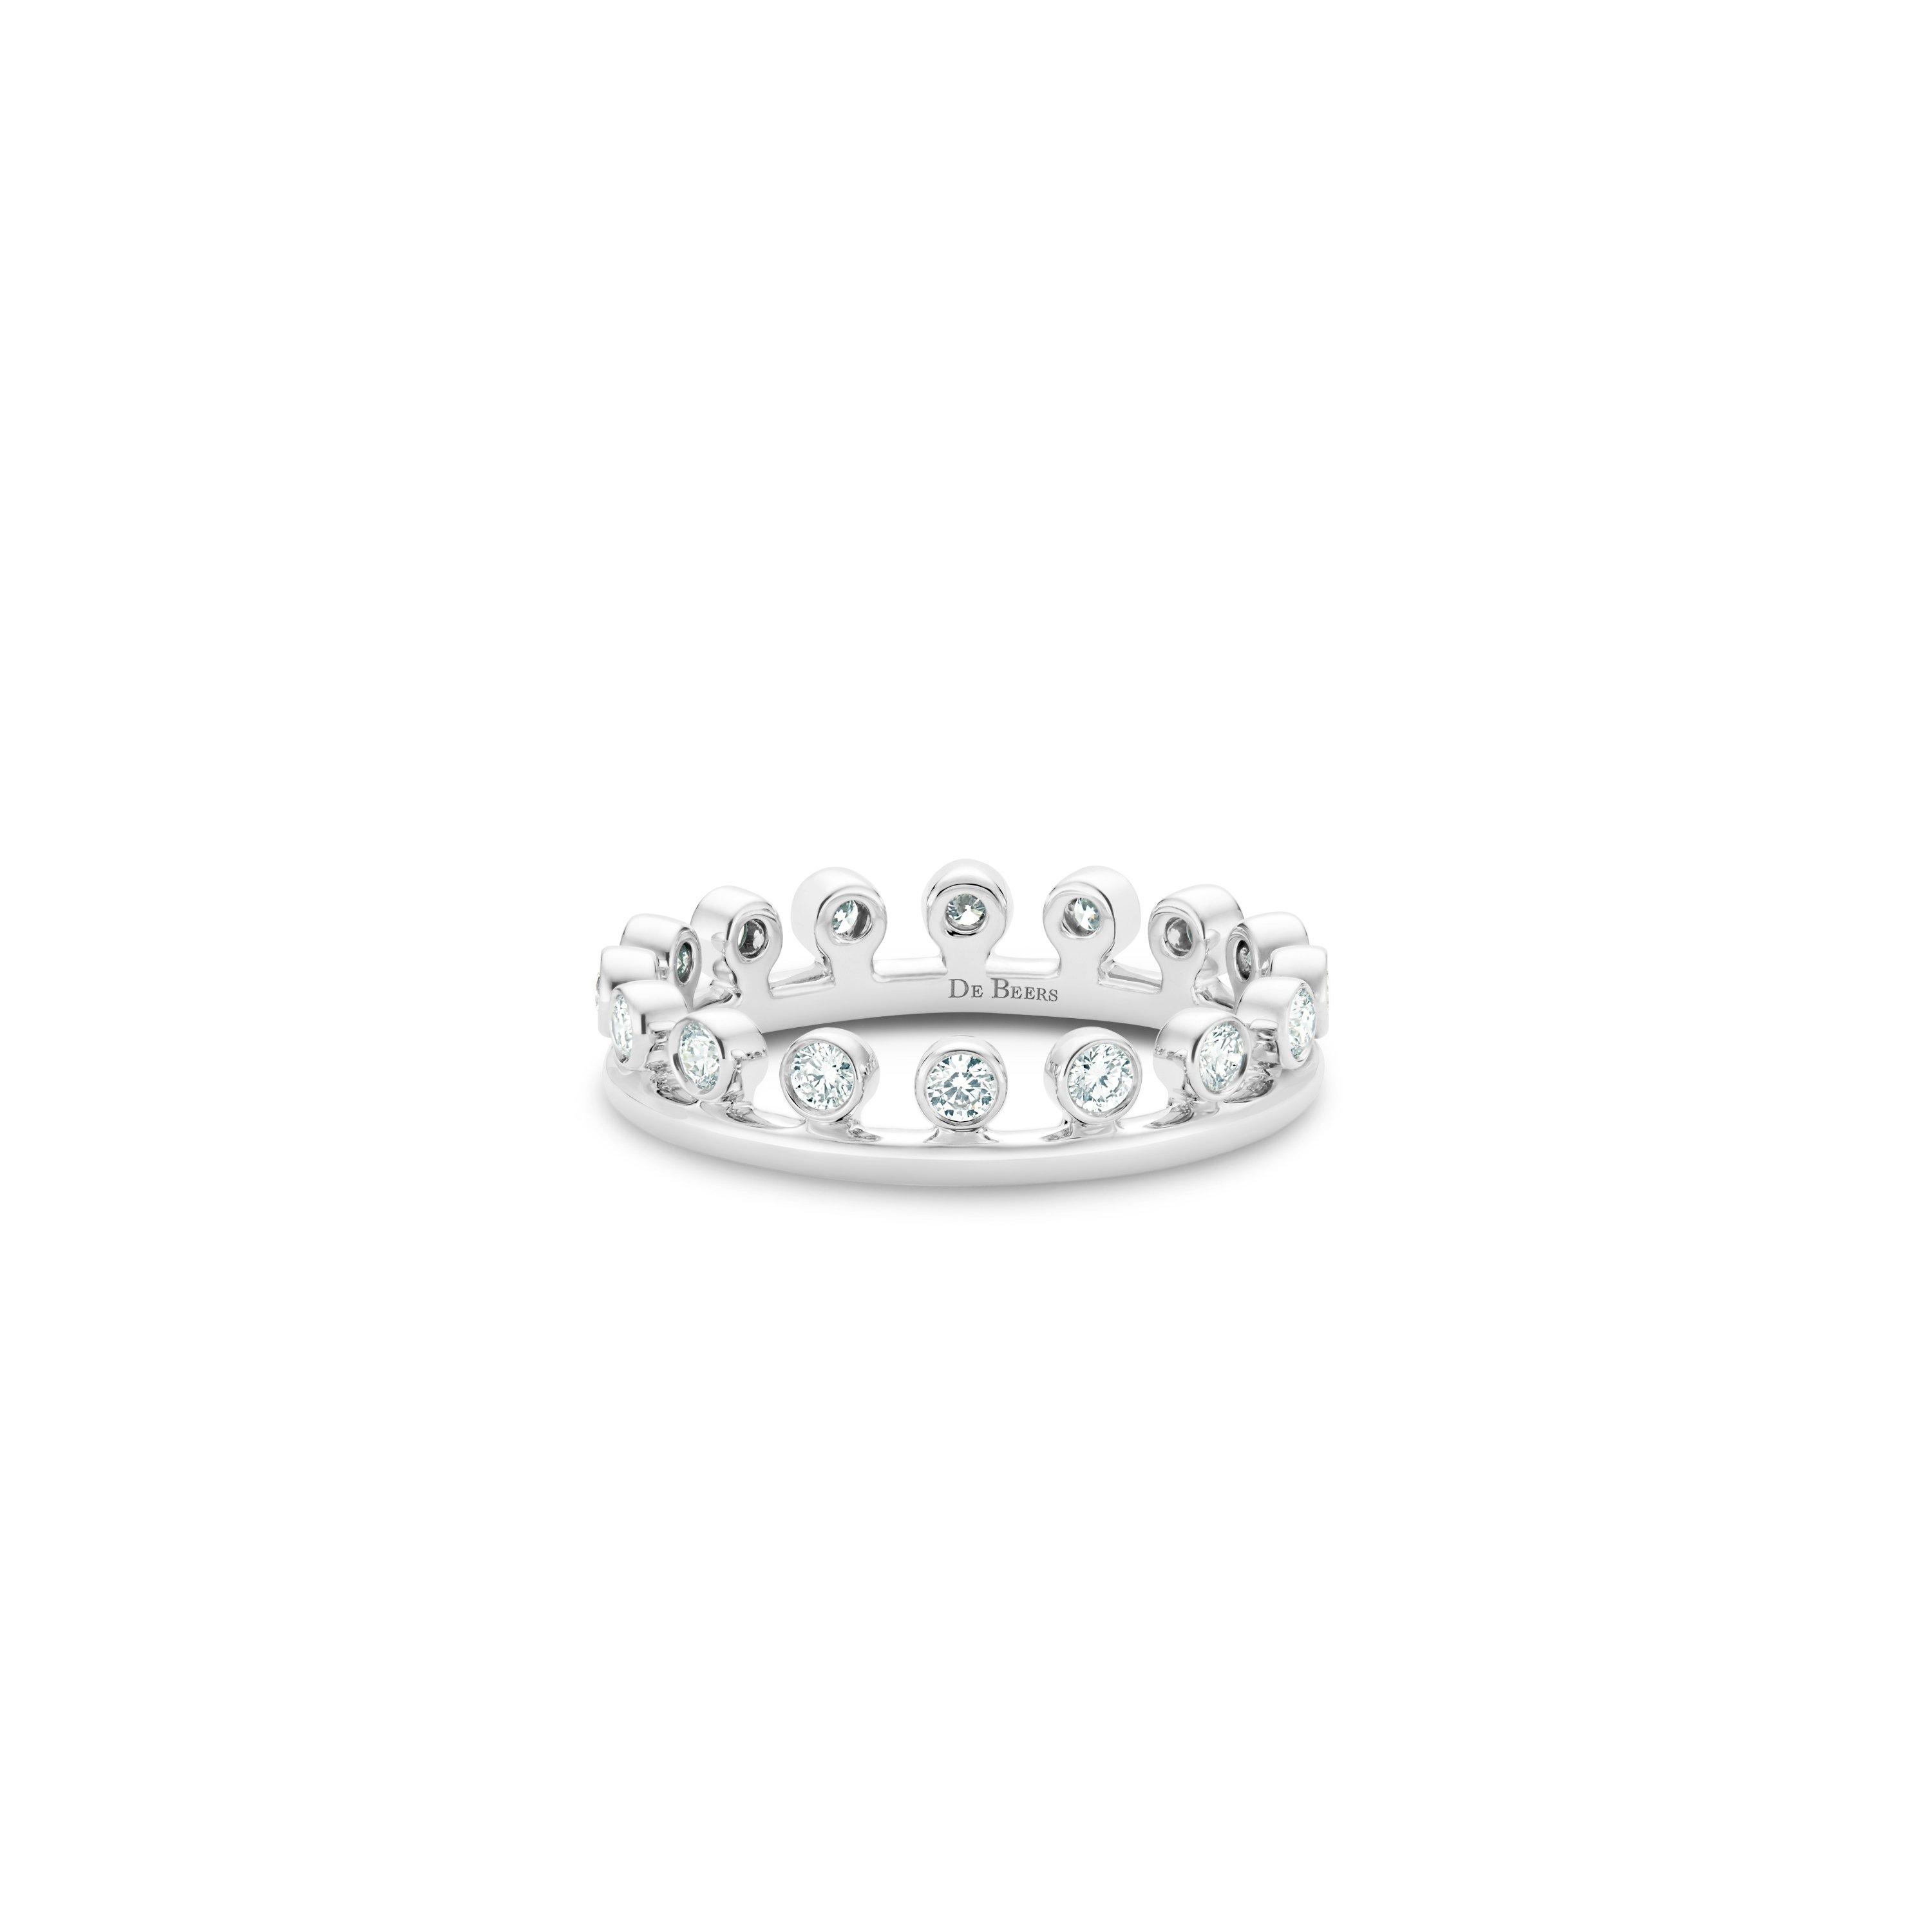 Dewdrop ring in white gold, image 1